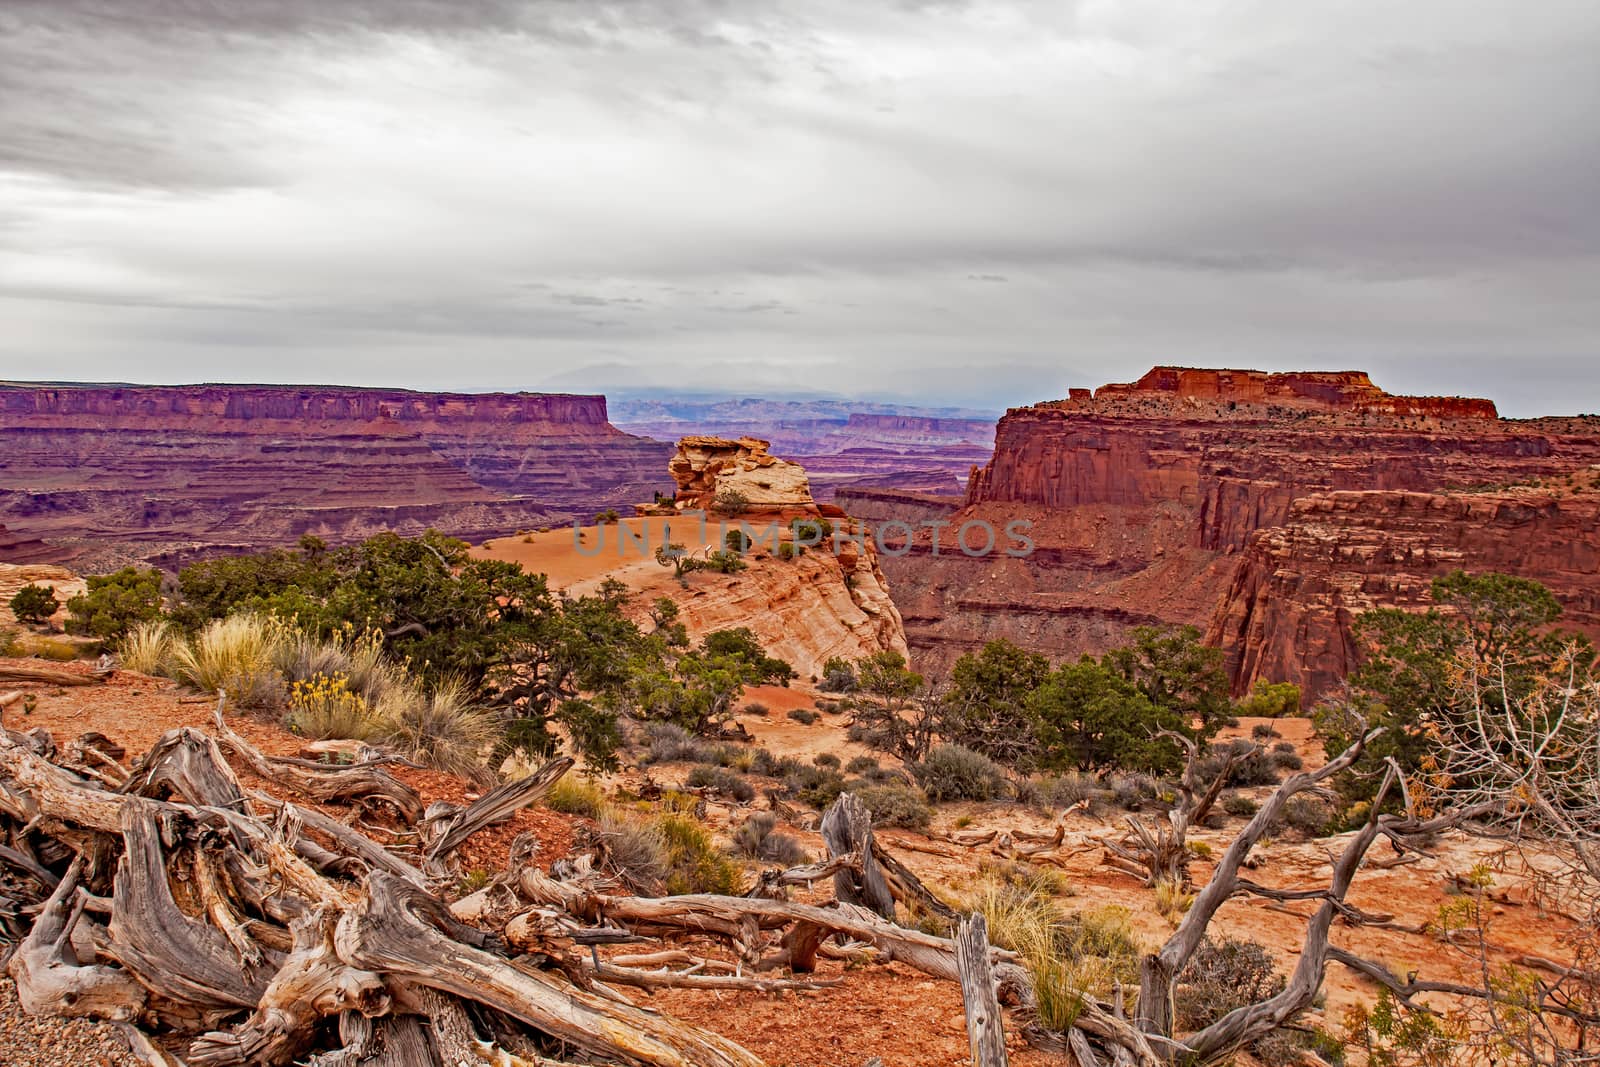 Canyonlands lookout by kobus_peche